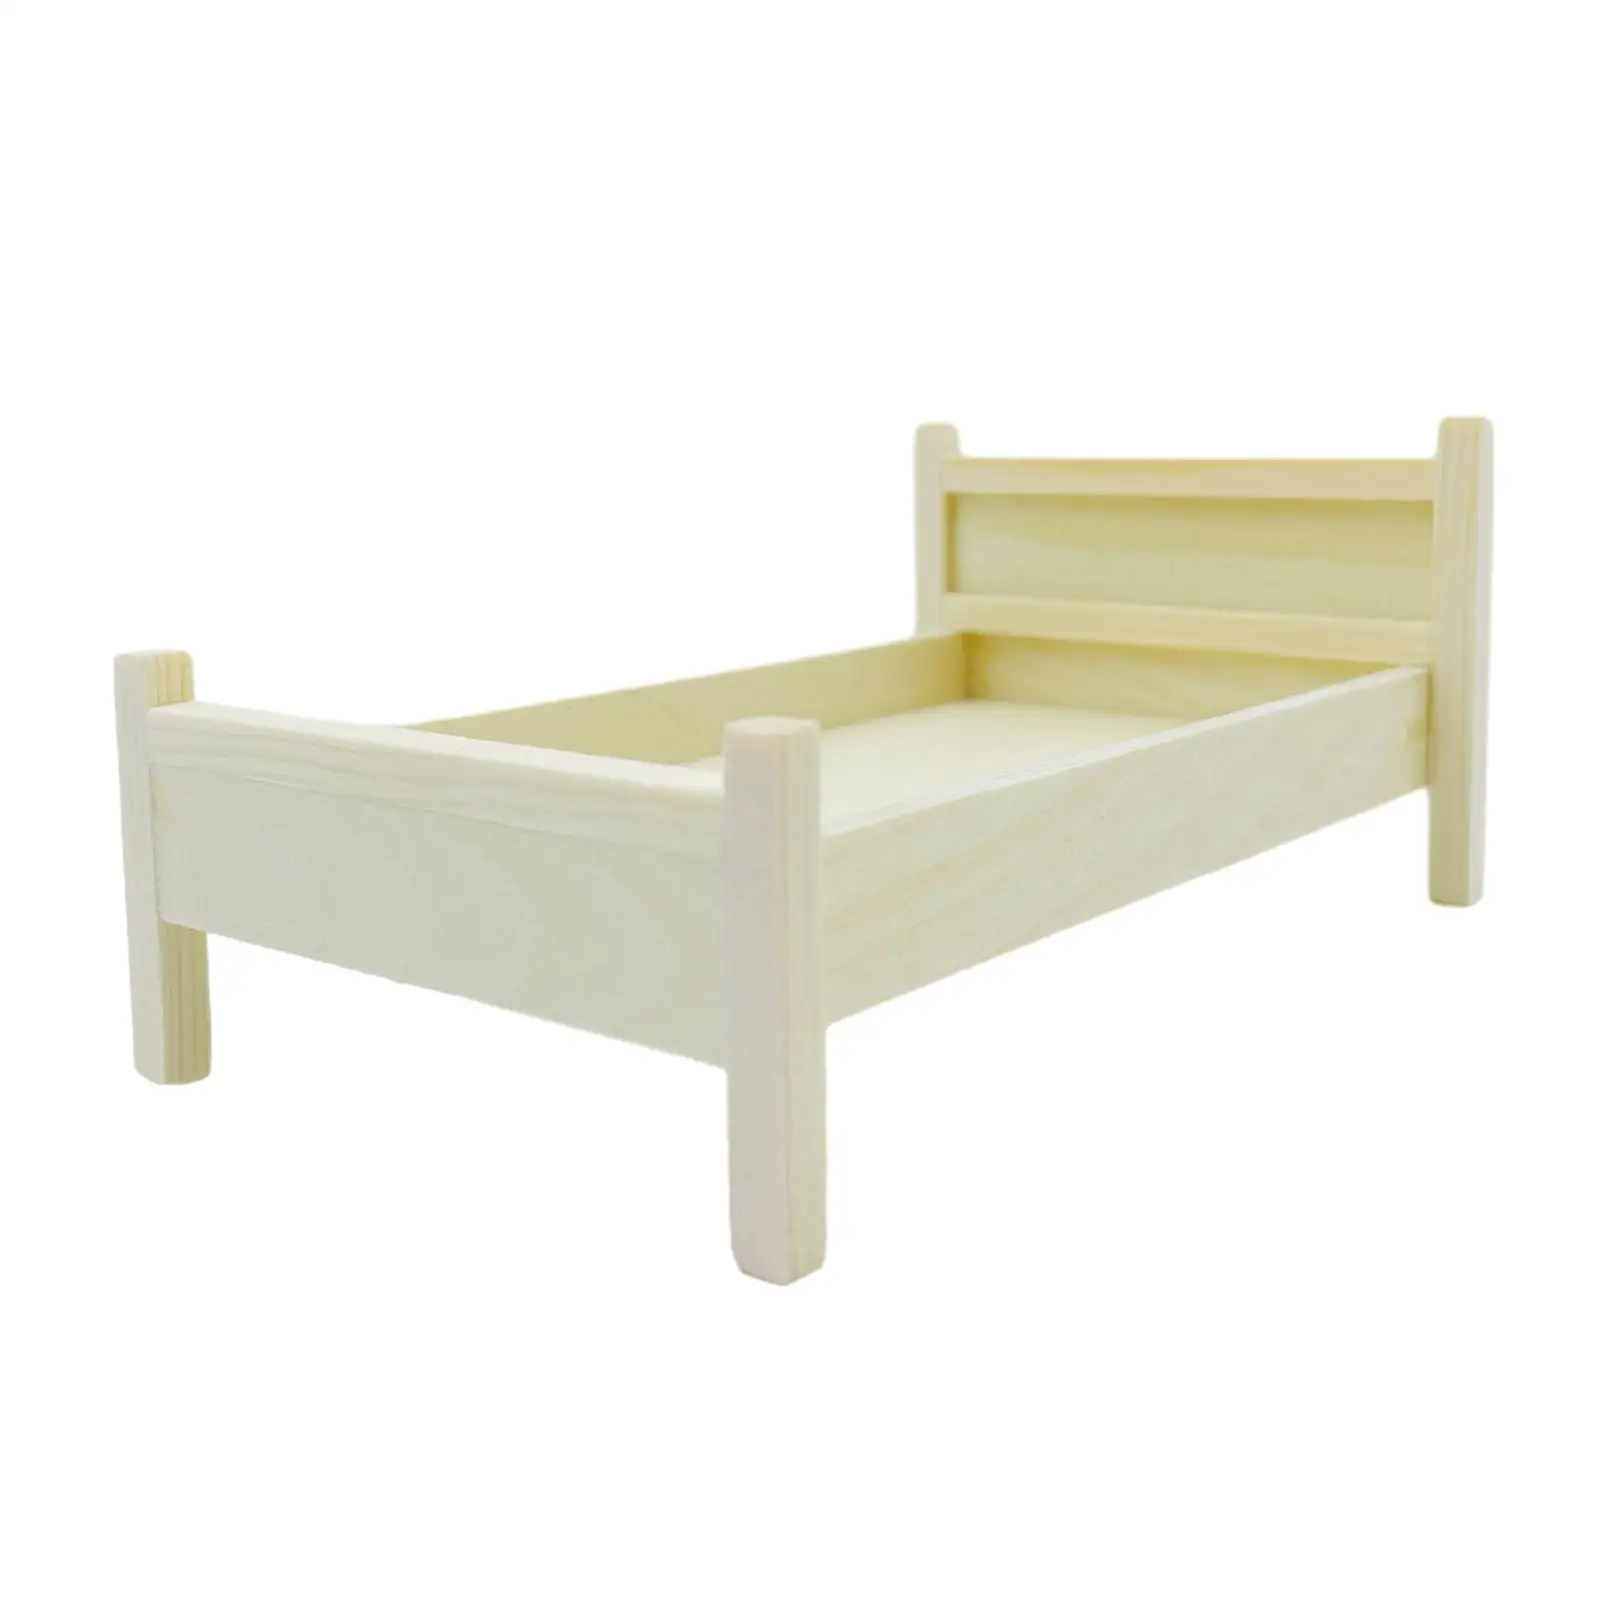 1/12 Scale Dollhouse Wooden Bed Dollhouse Miniature Bed for Photo Props